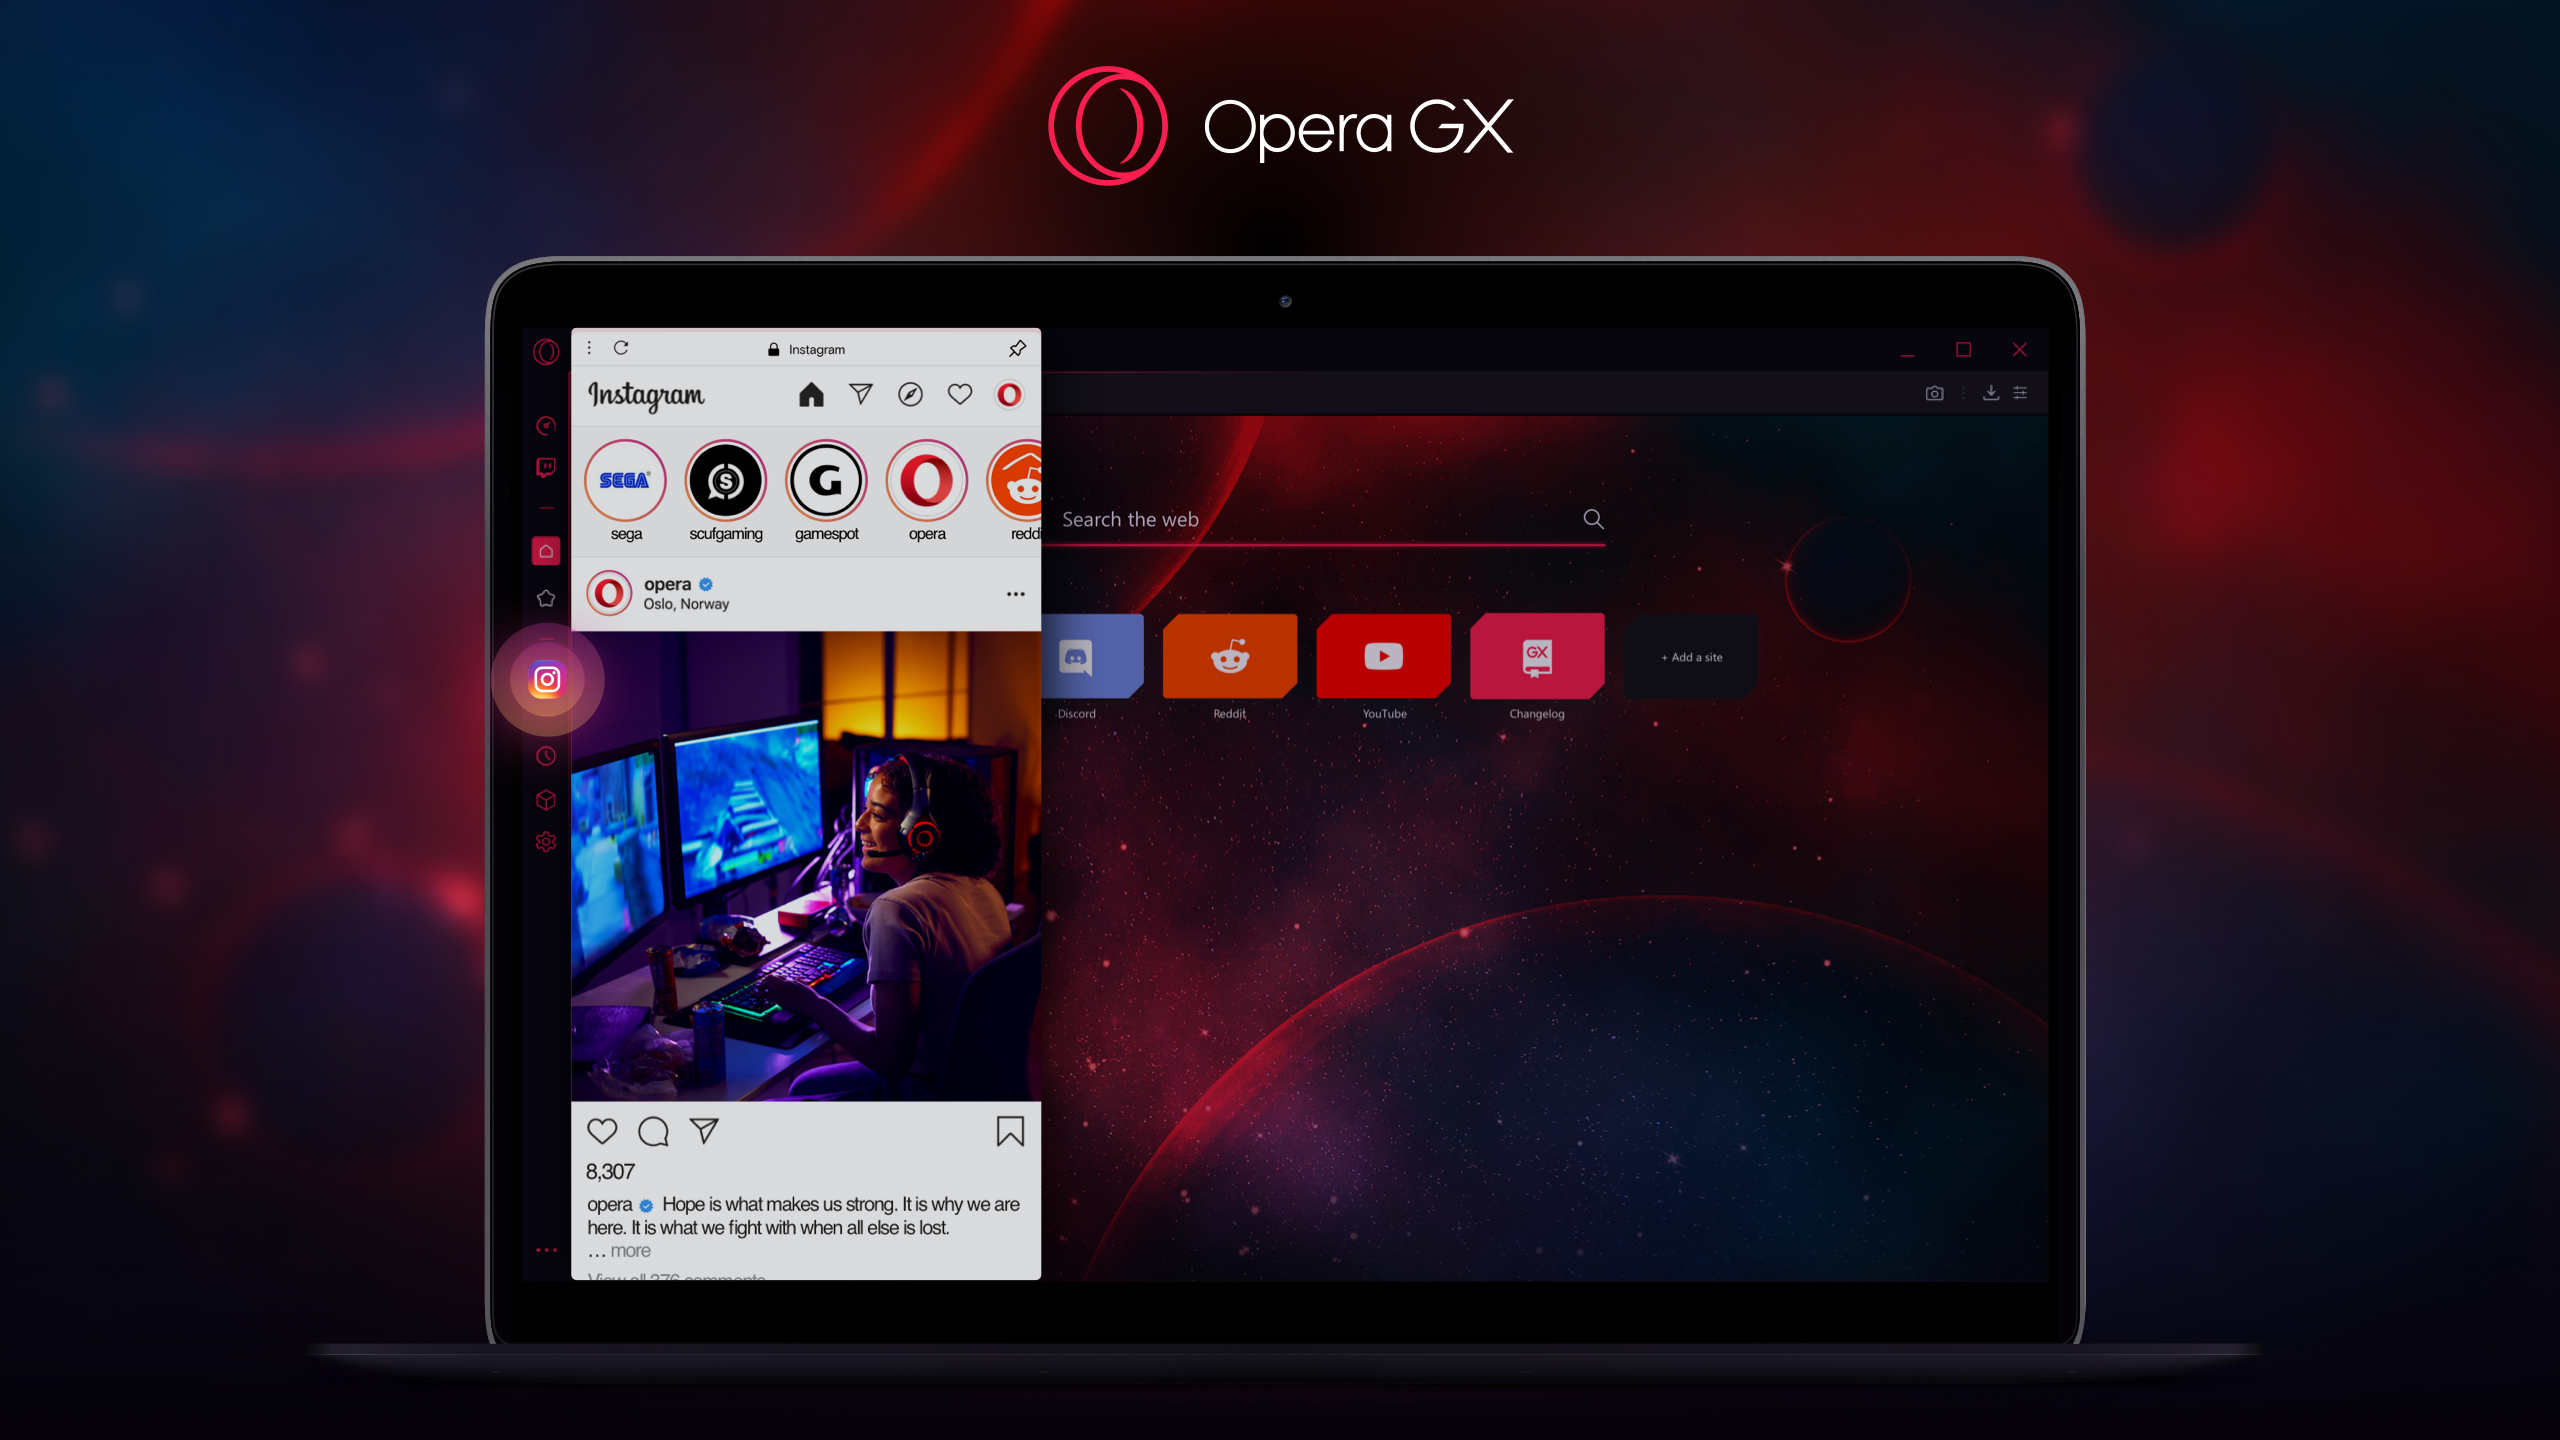 Opera GX now with Instagram and workspaces